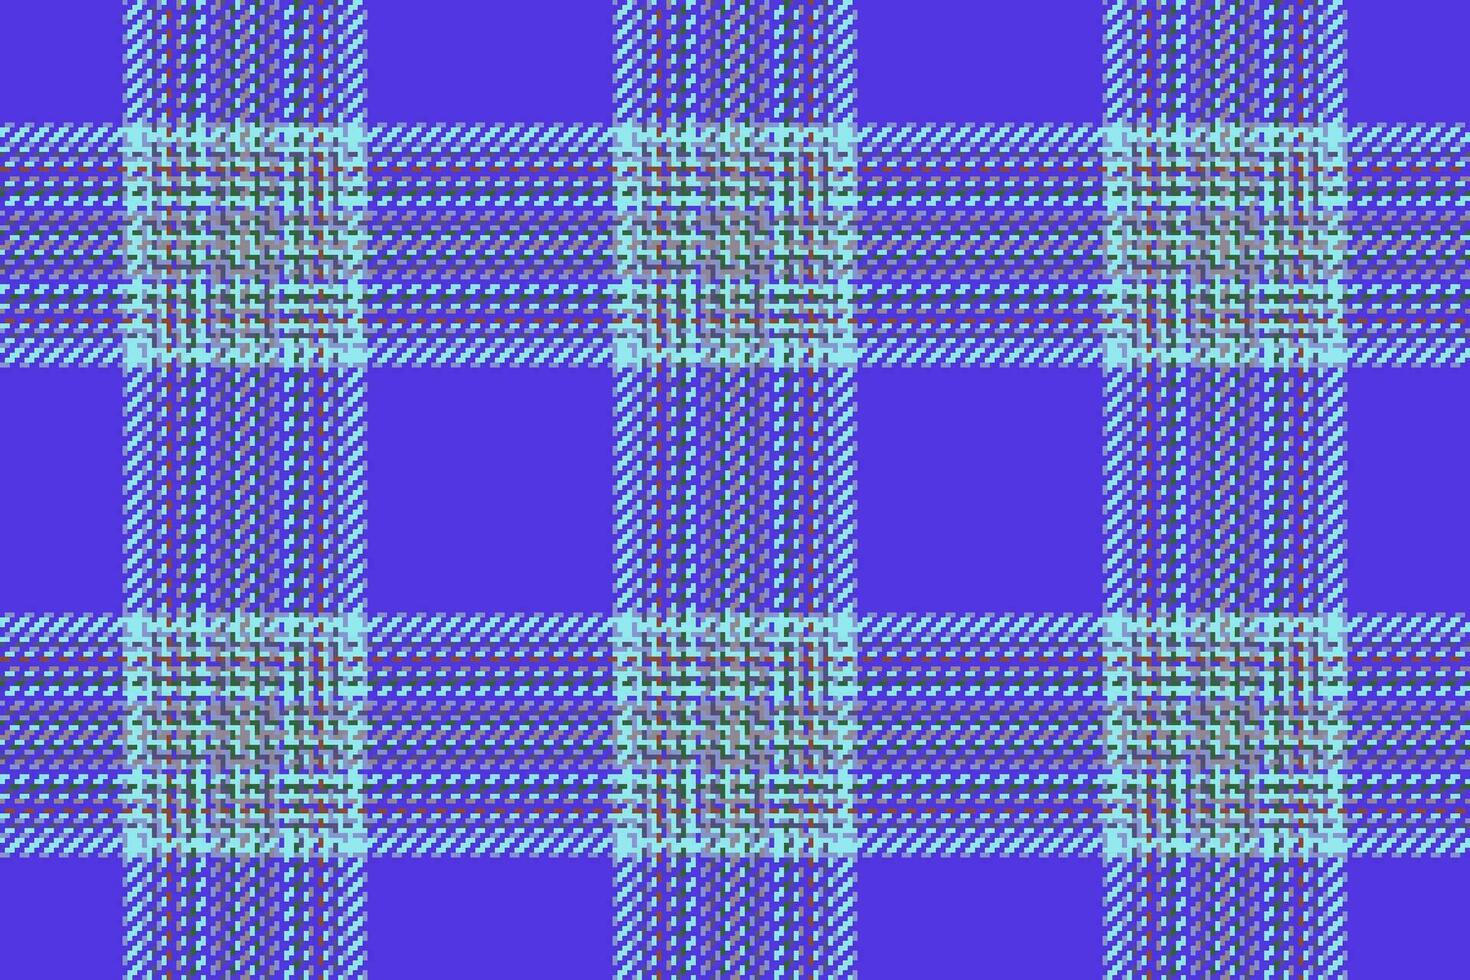 Tartan fabric check of background textile pattern with a vector seamless plaid texture.